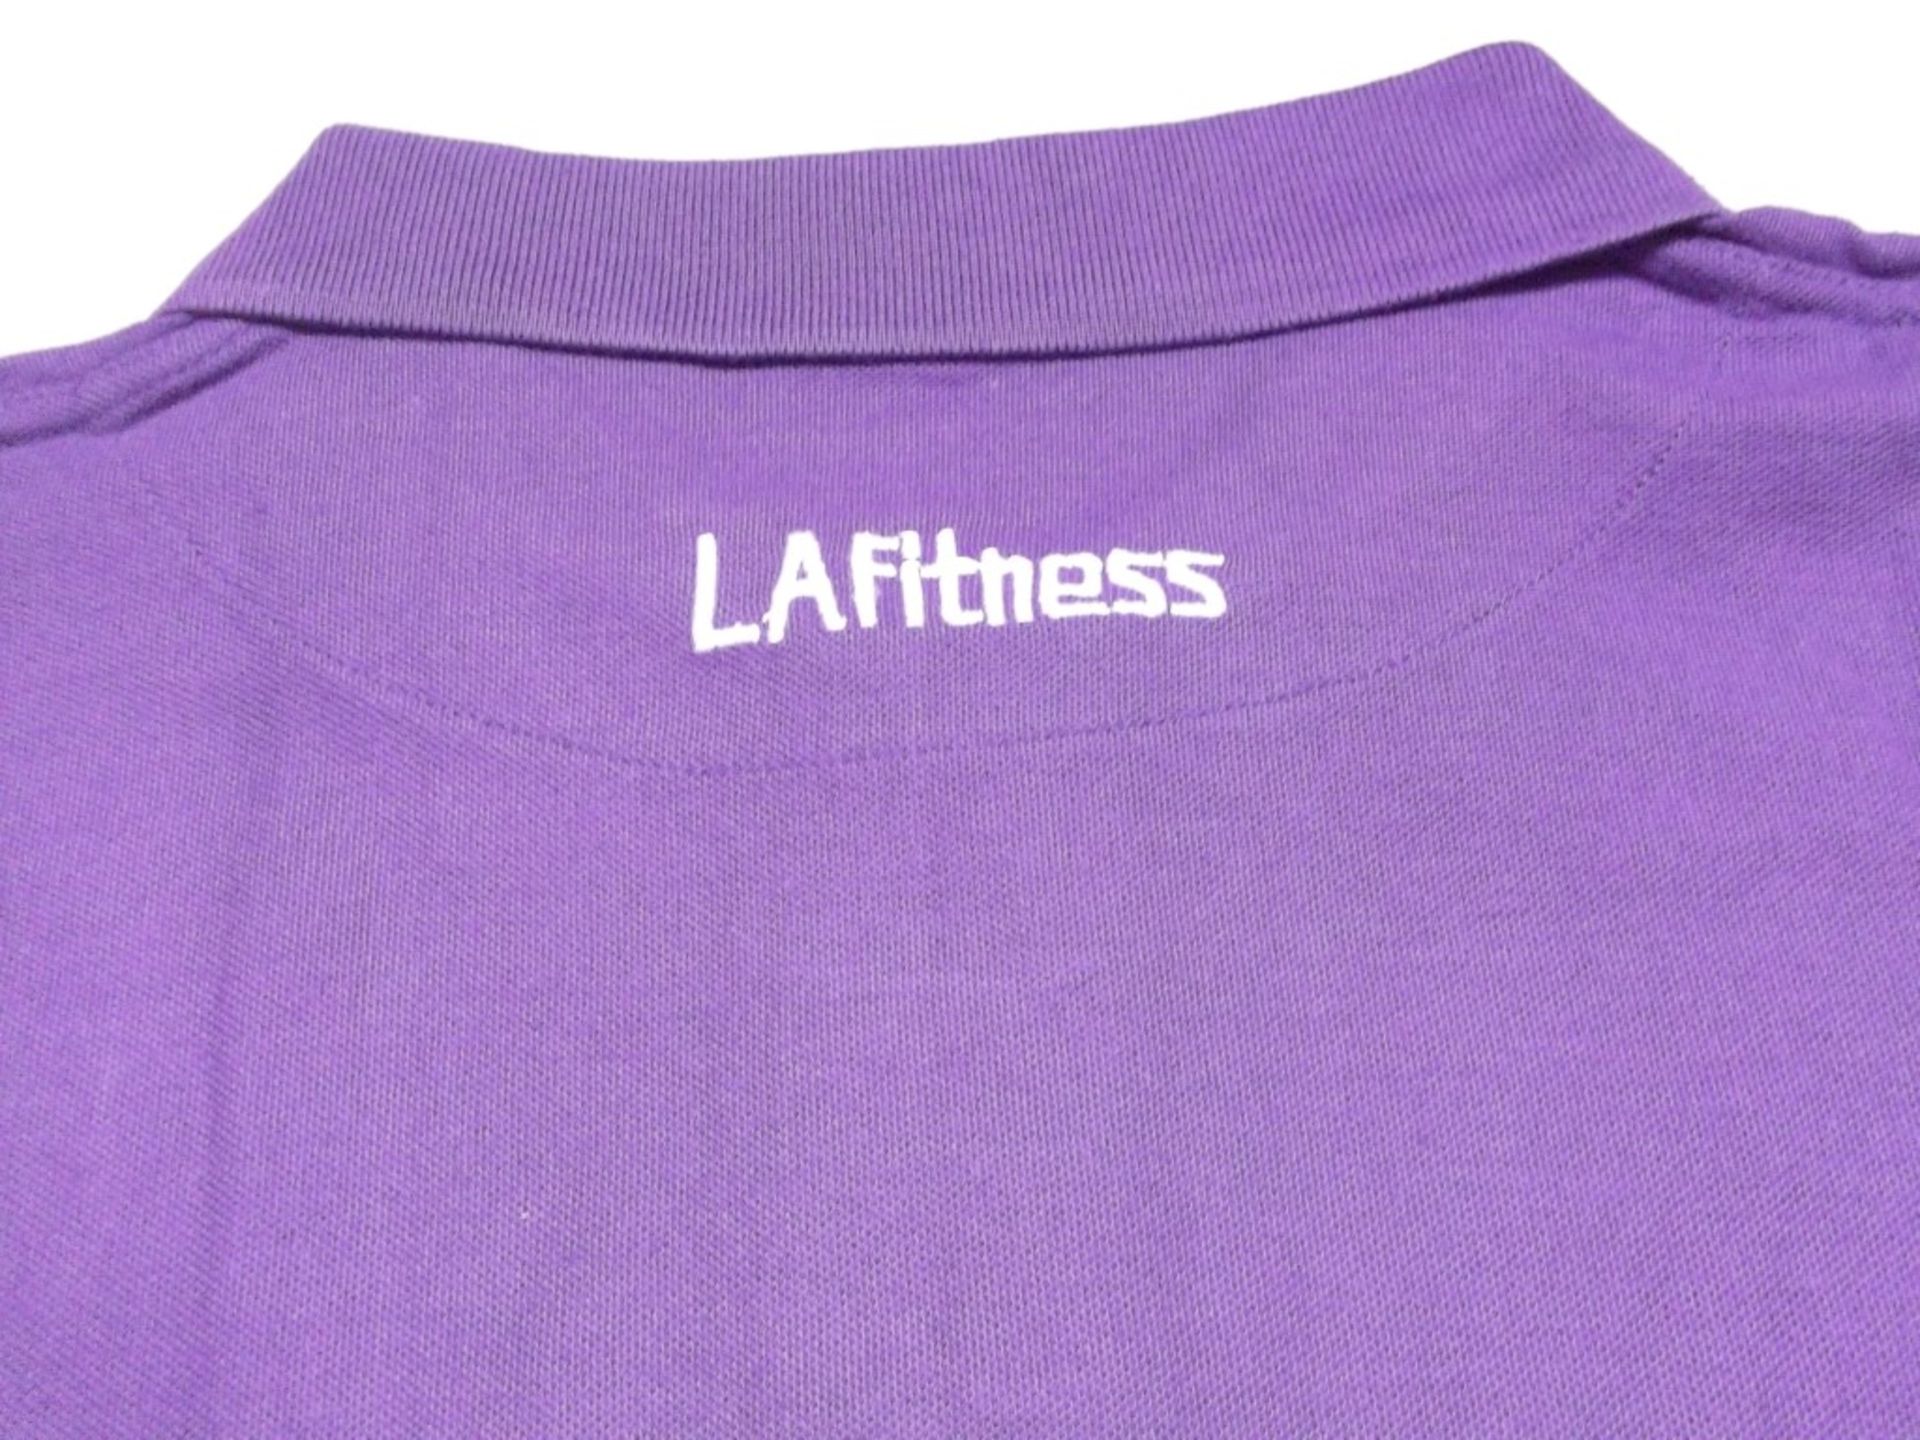 10 x LA Fitness Branded POLO Shirts - Size XXXL - Colour: Purple - CL155 - New & Sealed - - Image 3 of 3